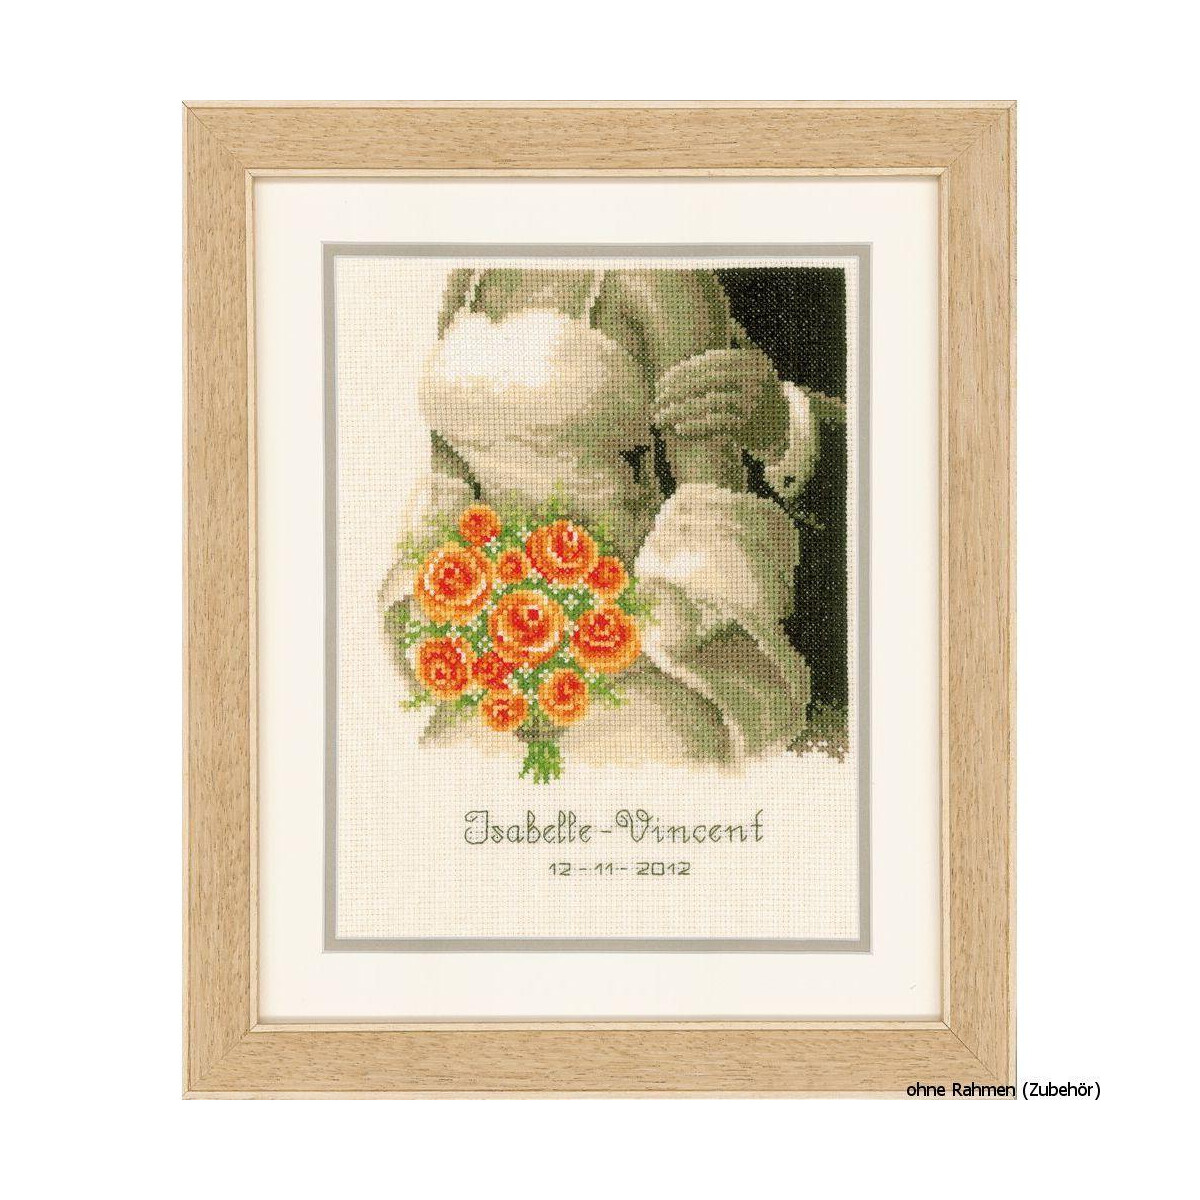 Vervaco Counted cross stitch kit Wedding bouquet, DIY